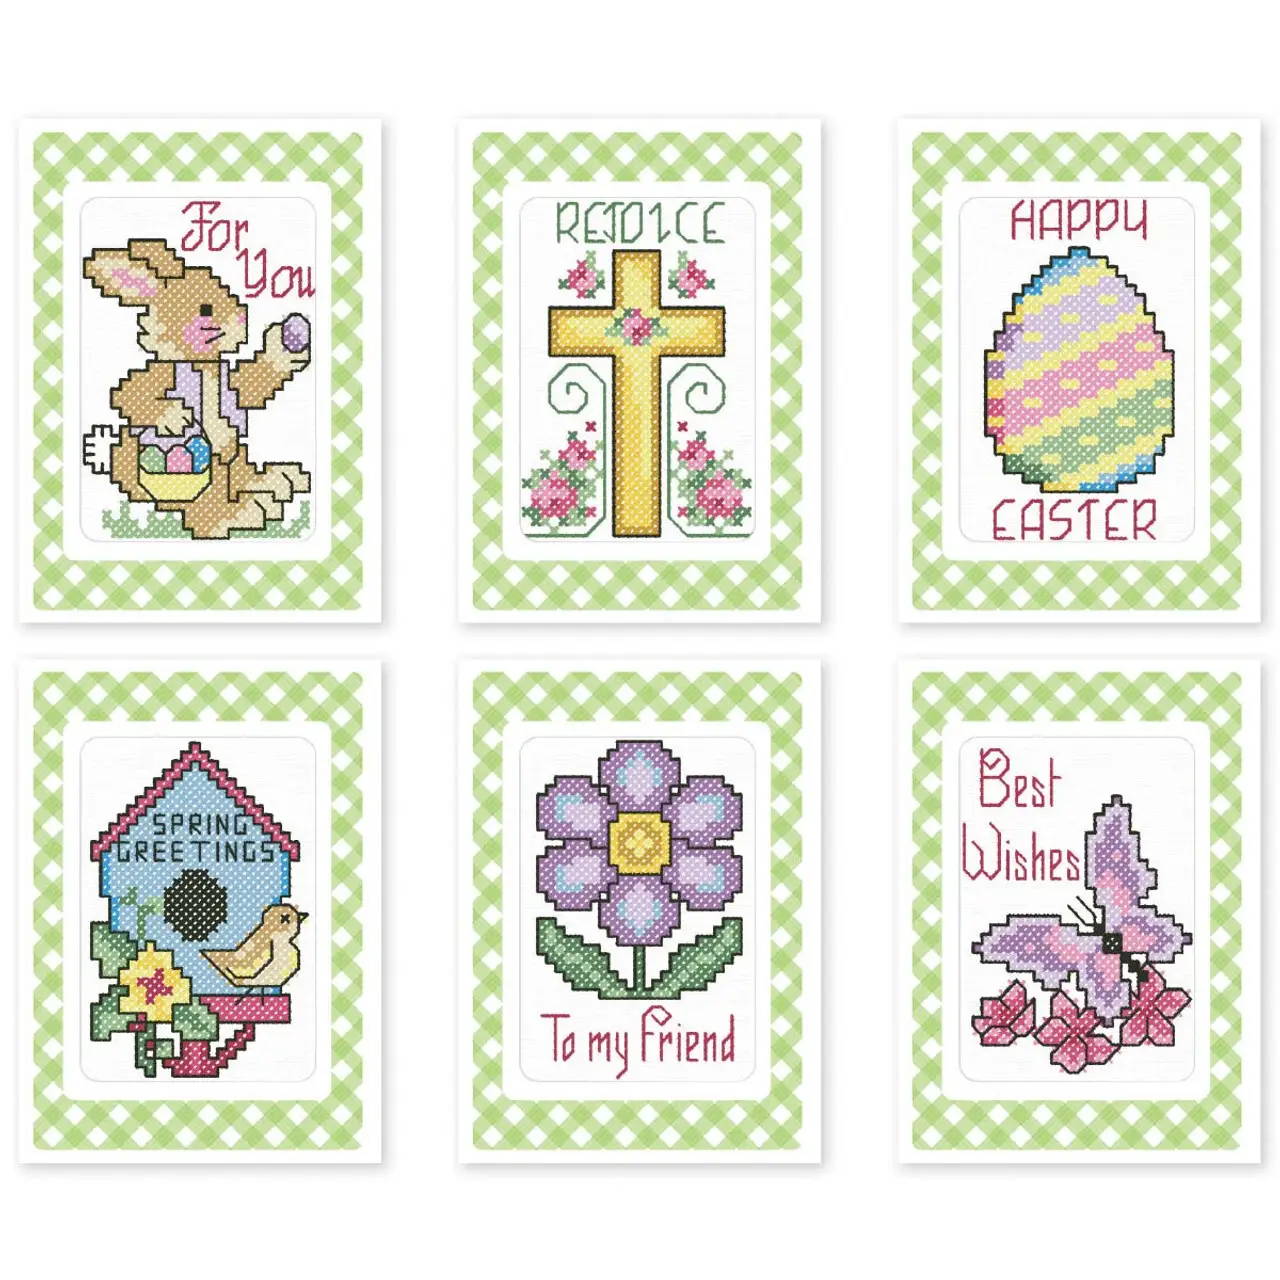 Herrschners Welcome Springtime Greeting Cards Stamped Cross-Stitch Kit